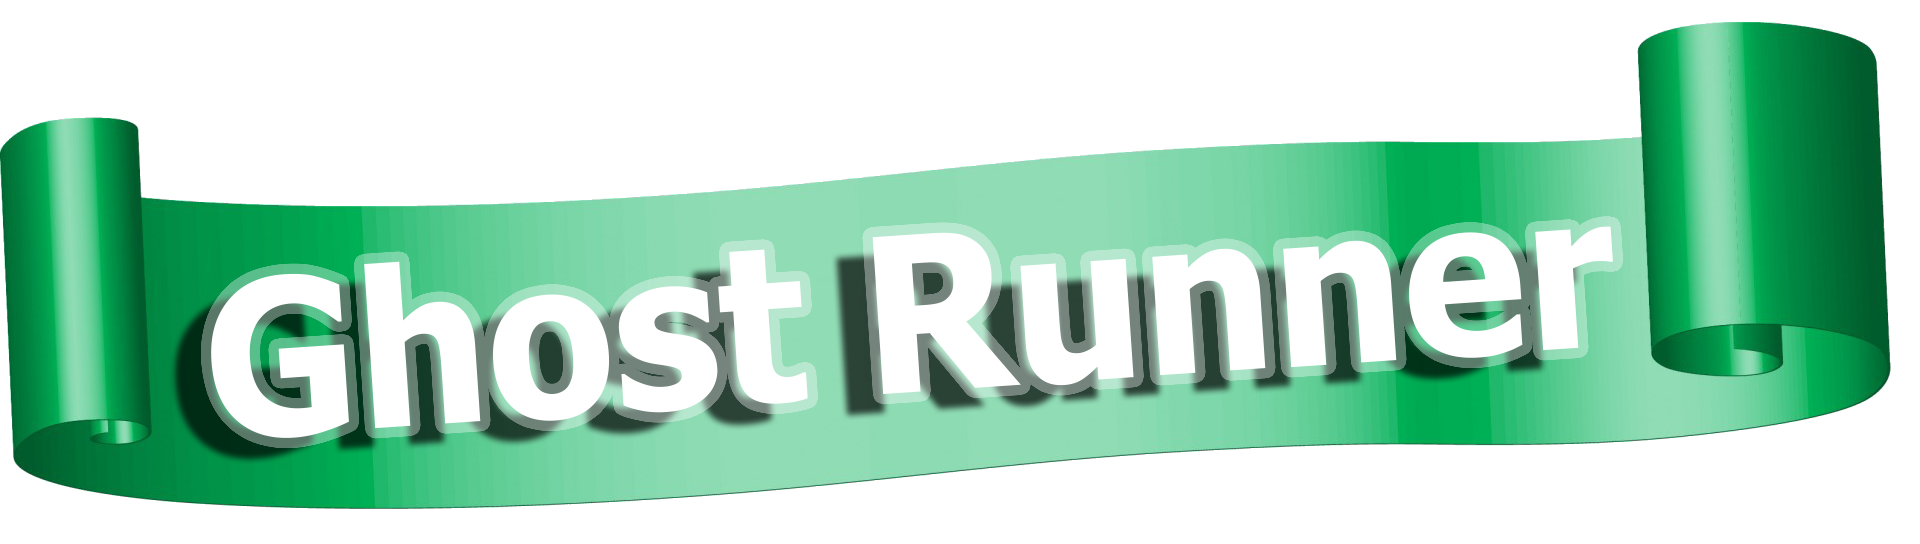 download ghost runner for free